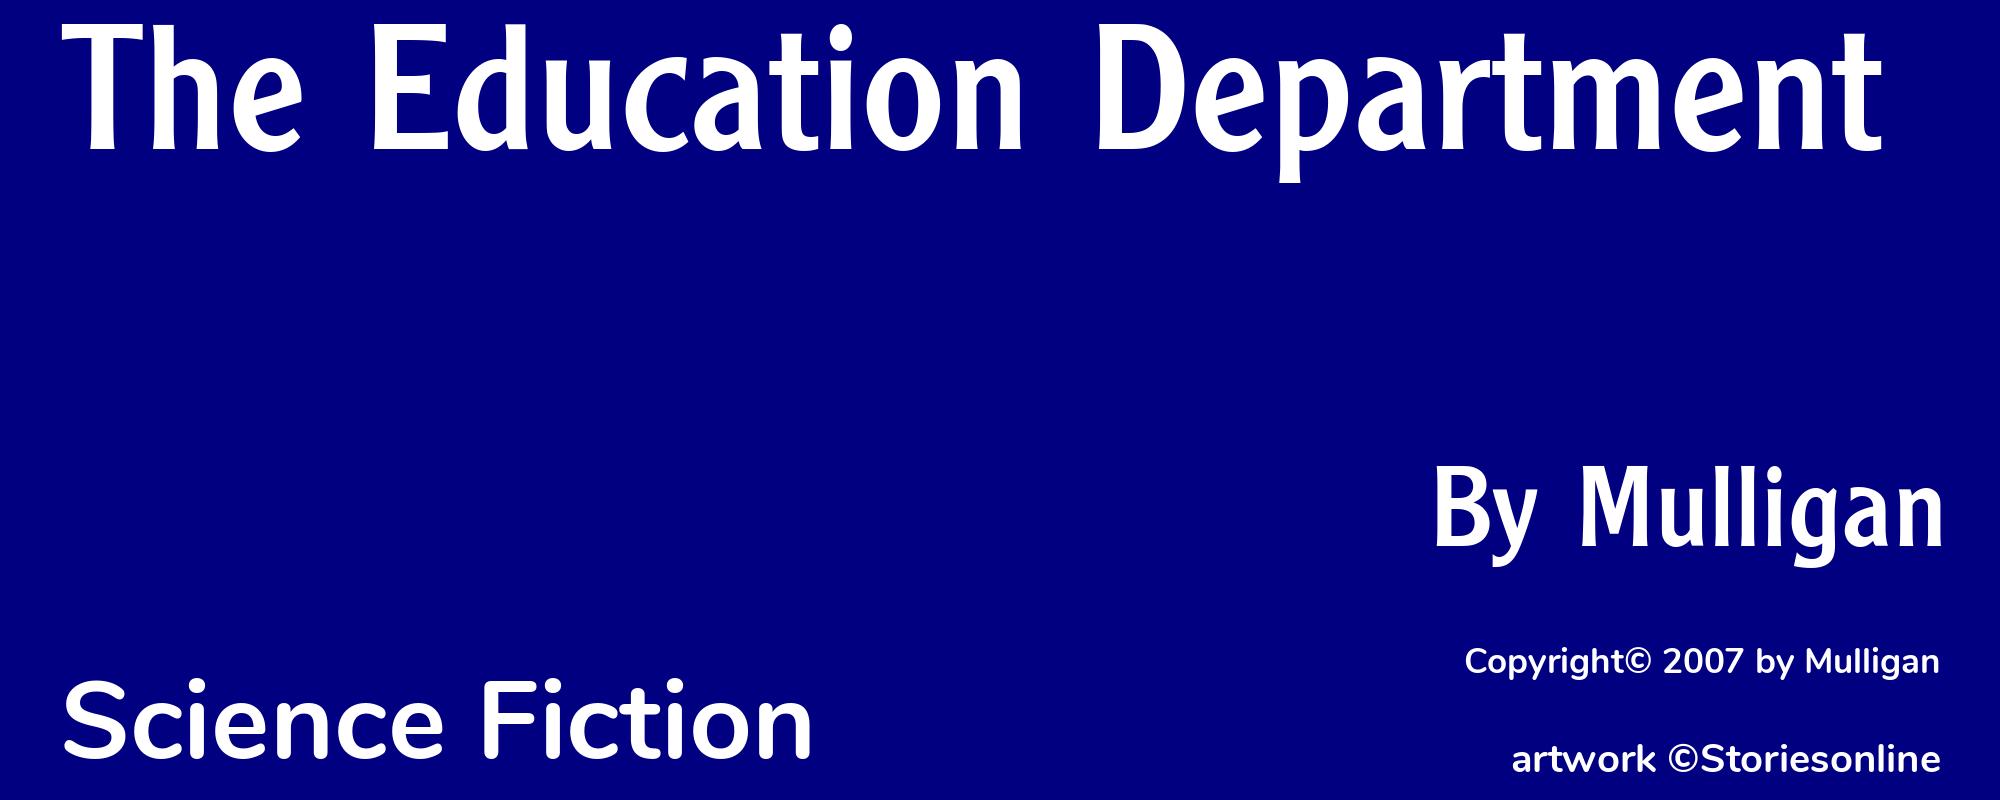 The Education Department - Cover